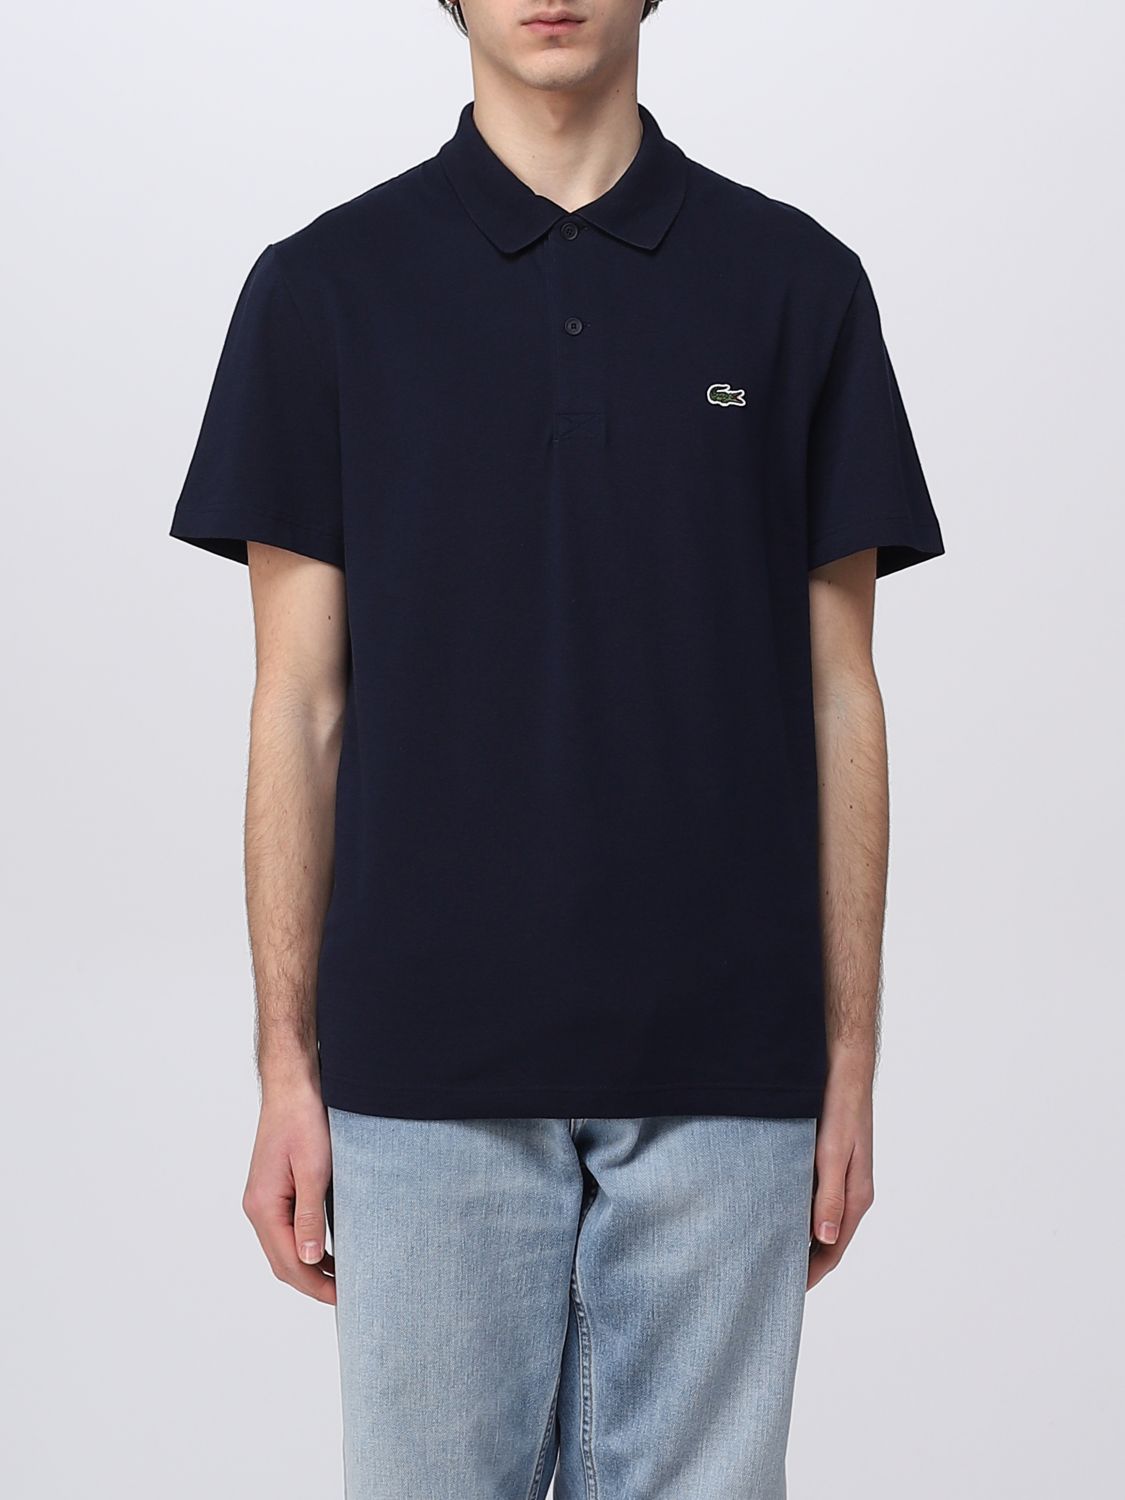 LACOSTE: polo shirt for man - Navy | Lacoste polo shirt DH0783 online ...